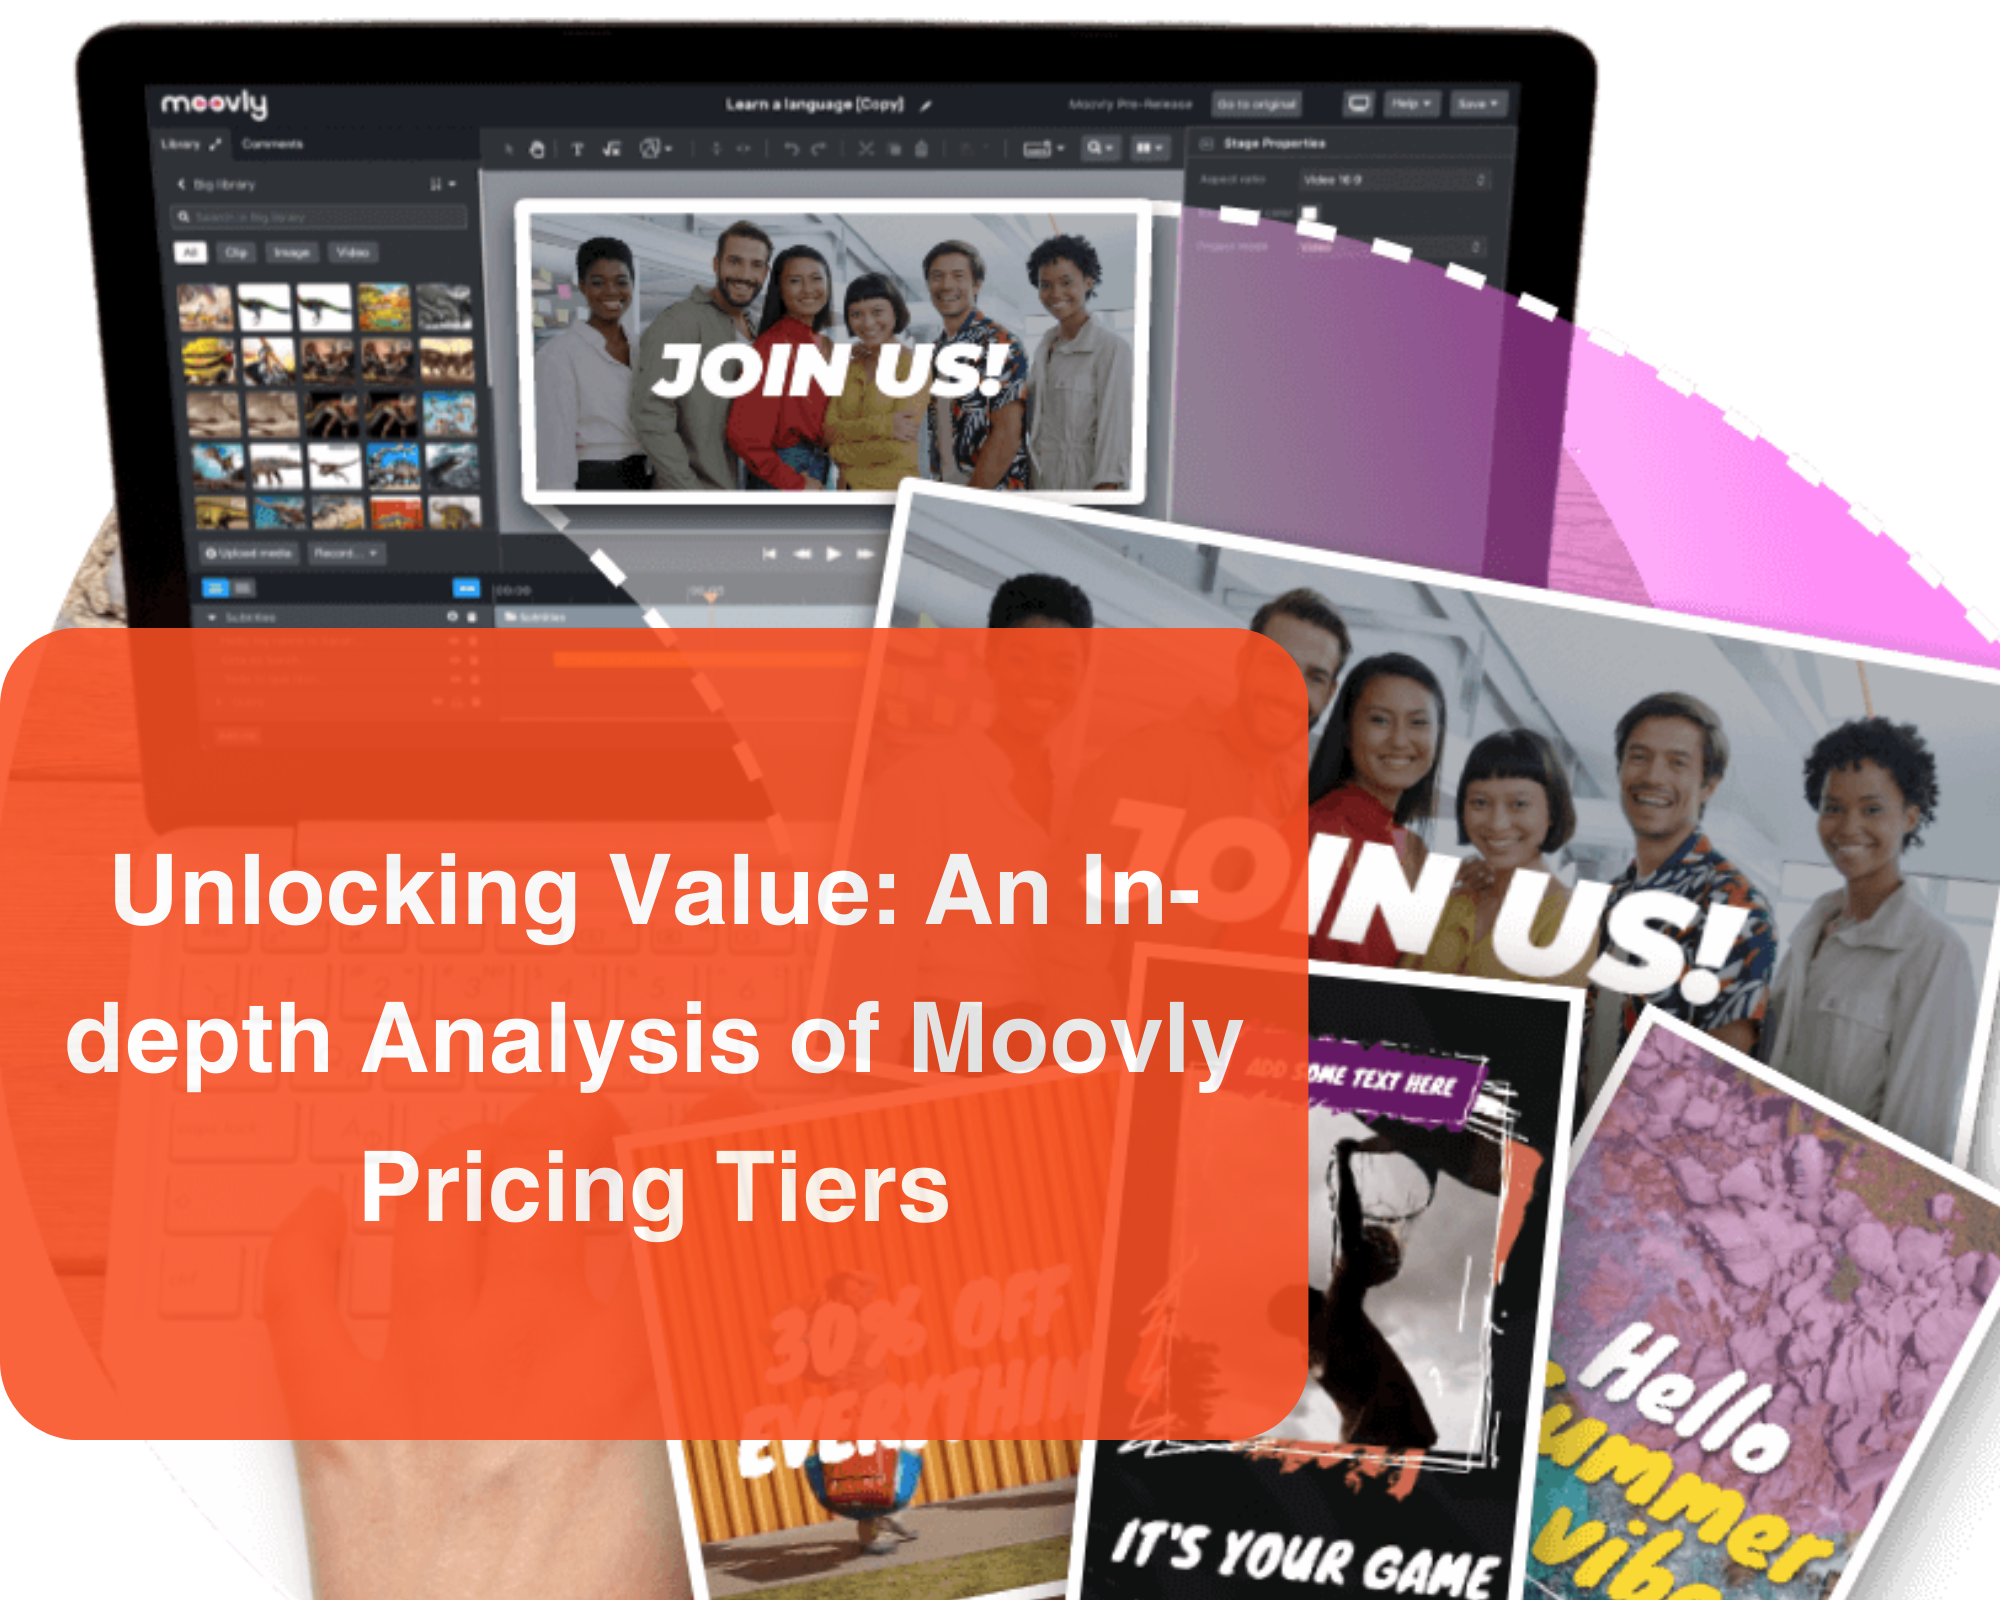 Moovly Pricing Tiers